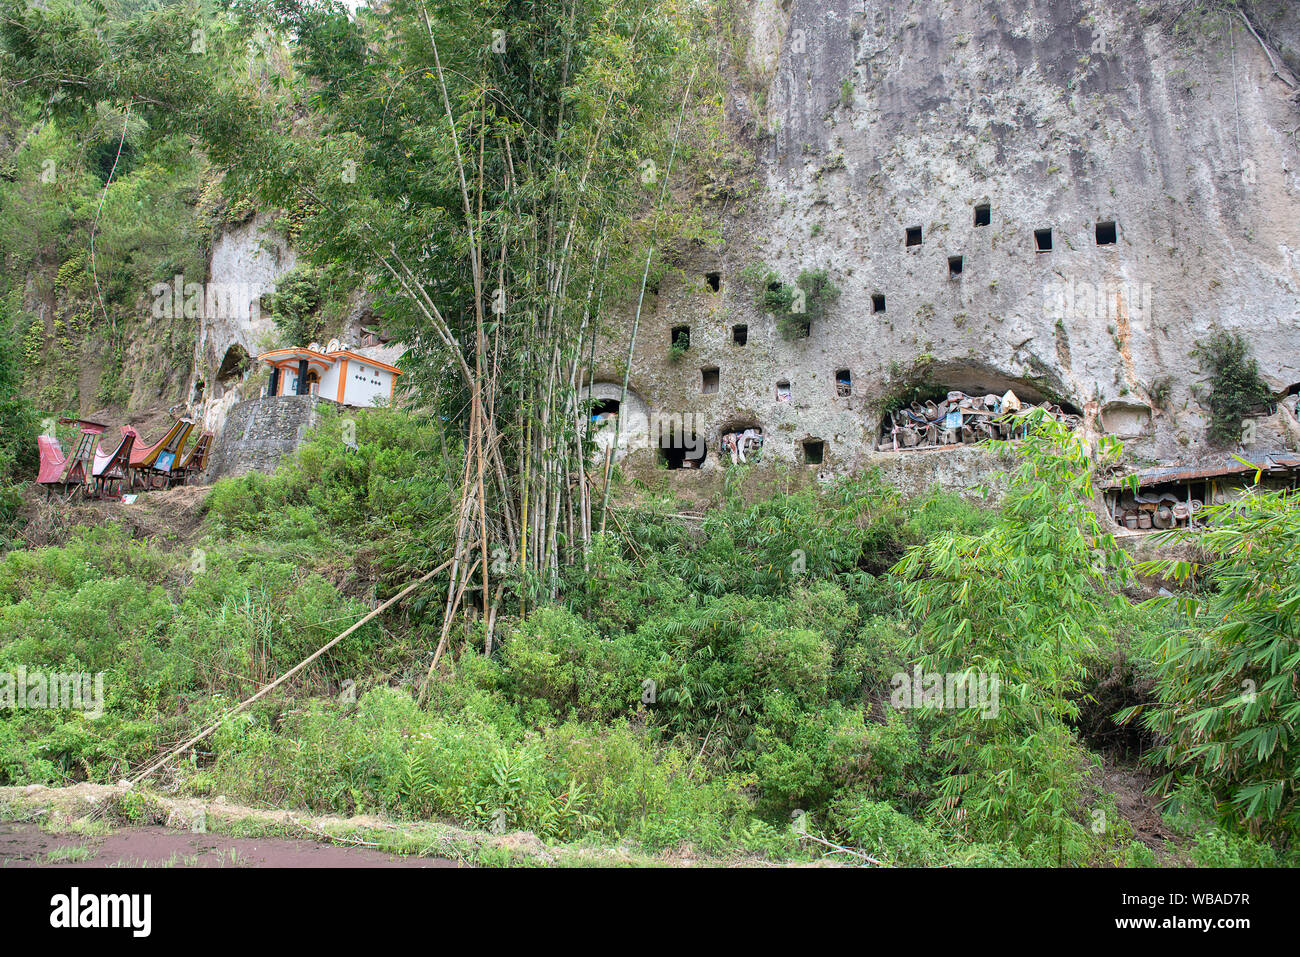 Cliffs burial site, traditional burial ground in Tana Toraja, worldwide unique ancestor cult of Sulawesi, Indonesia Stock Photo